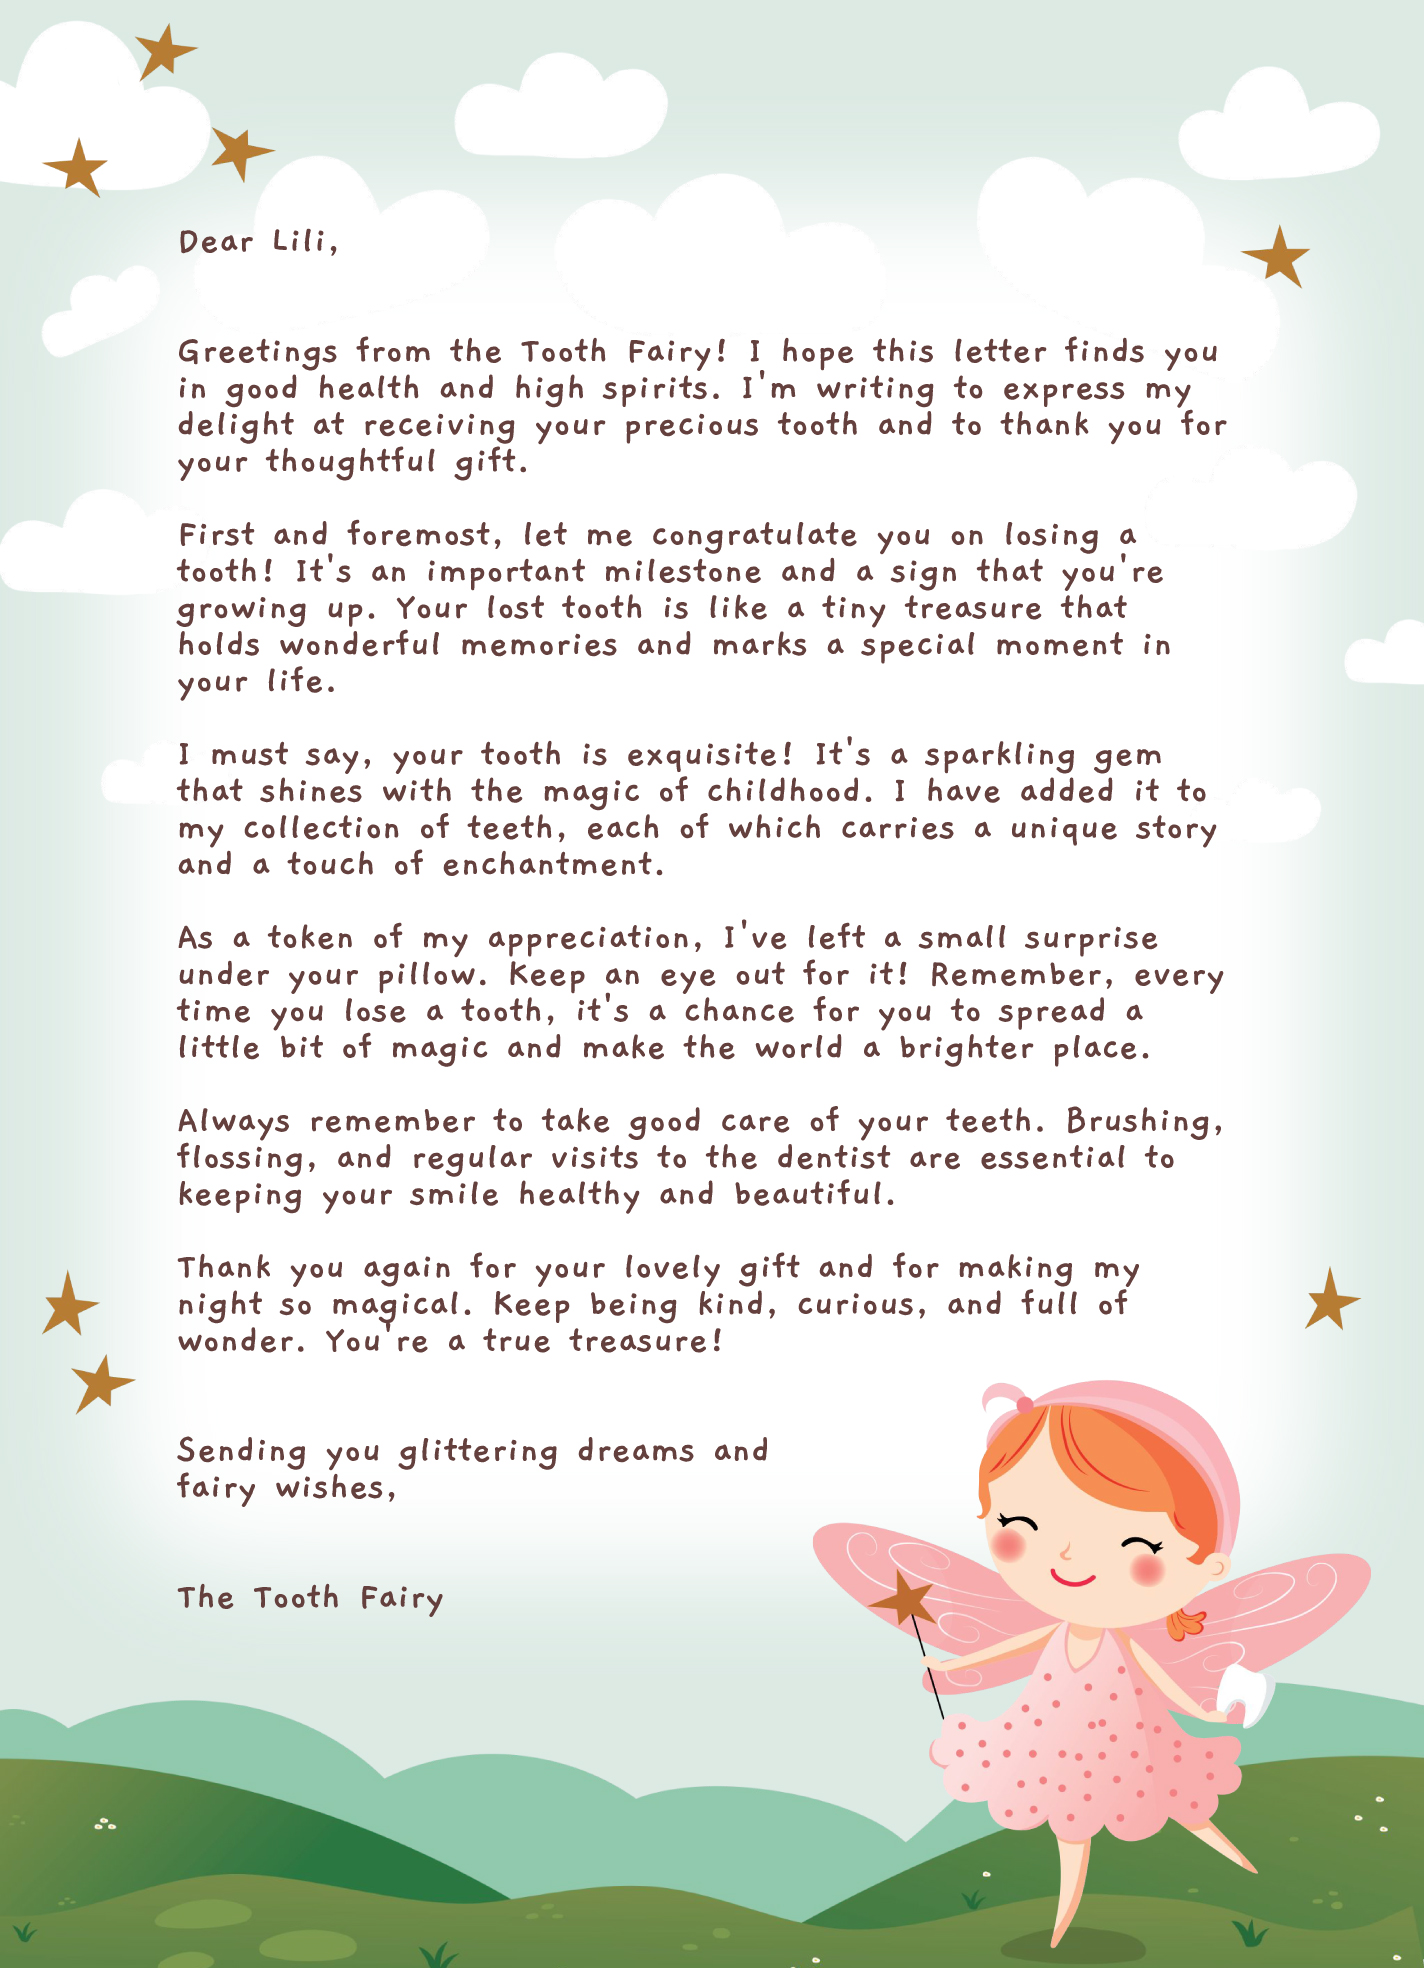 The 10 Best Tooth Fairy Letter Templates [Review] - Hold The Magic